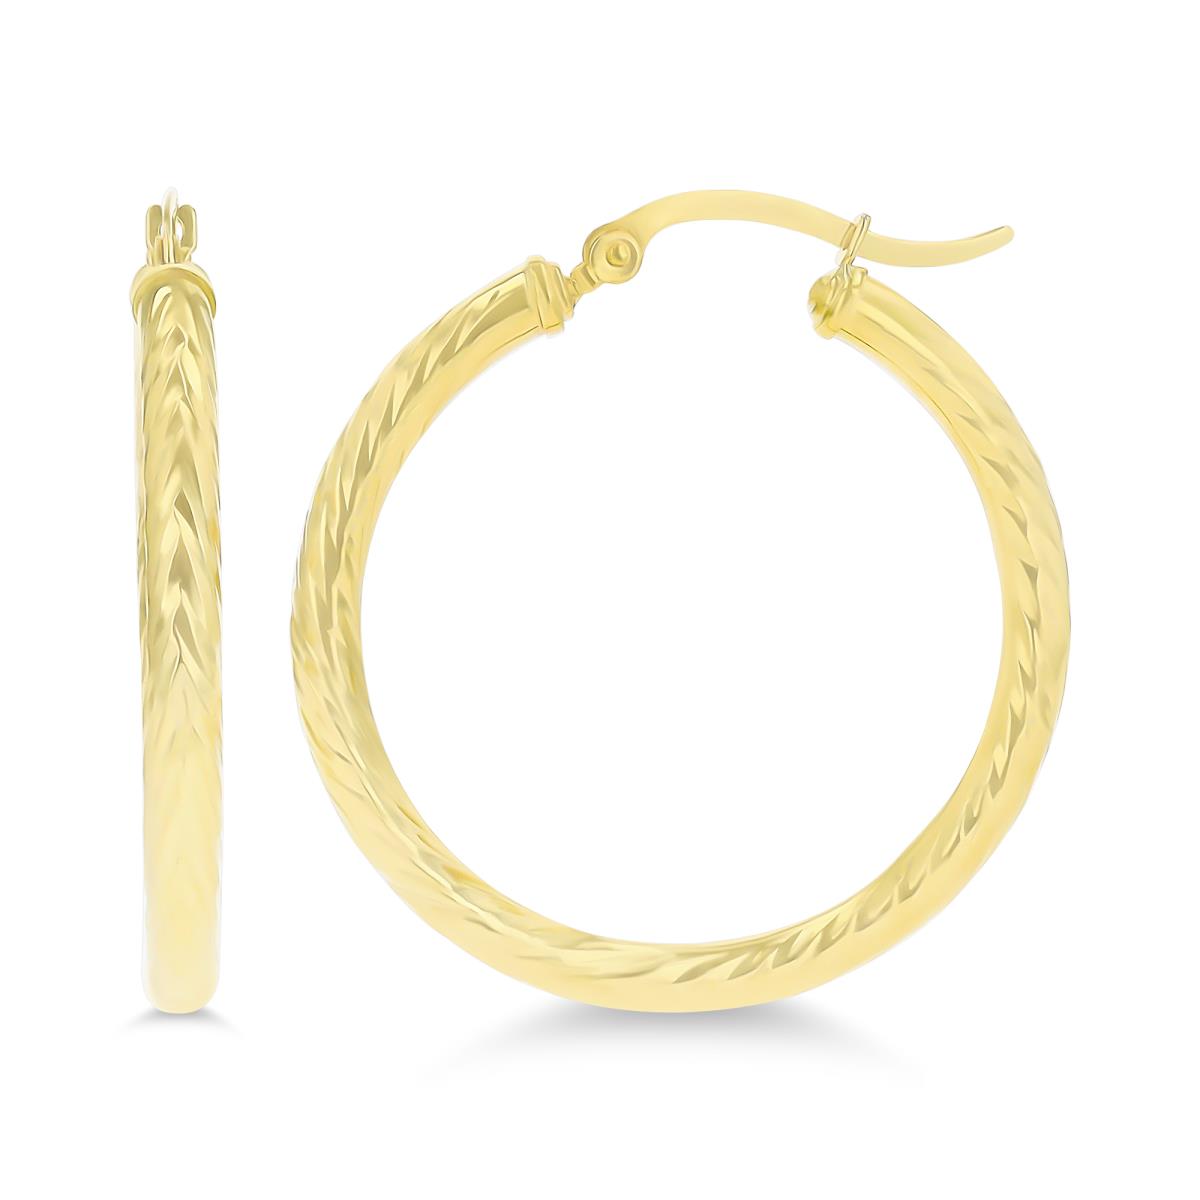 14K Yellow Gold 30x3mm (1.25") Twisted DC Hoop Earring